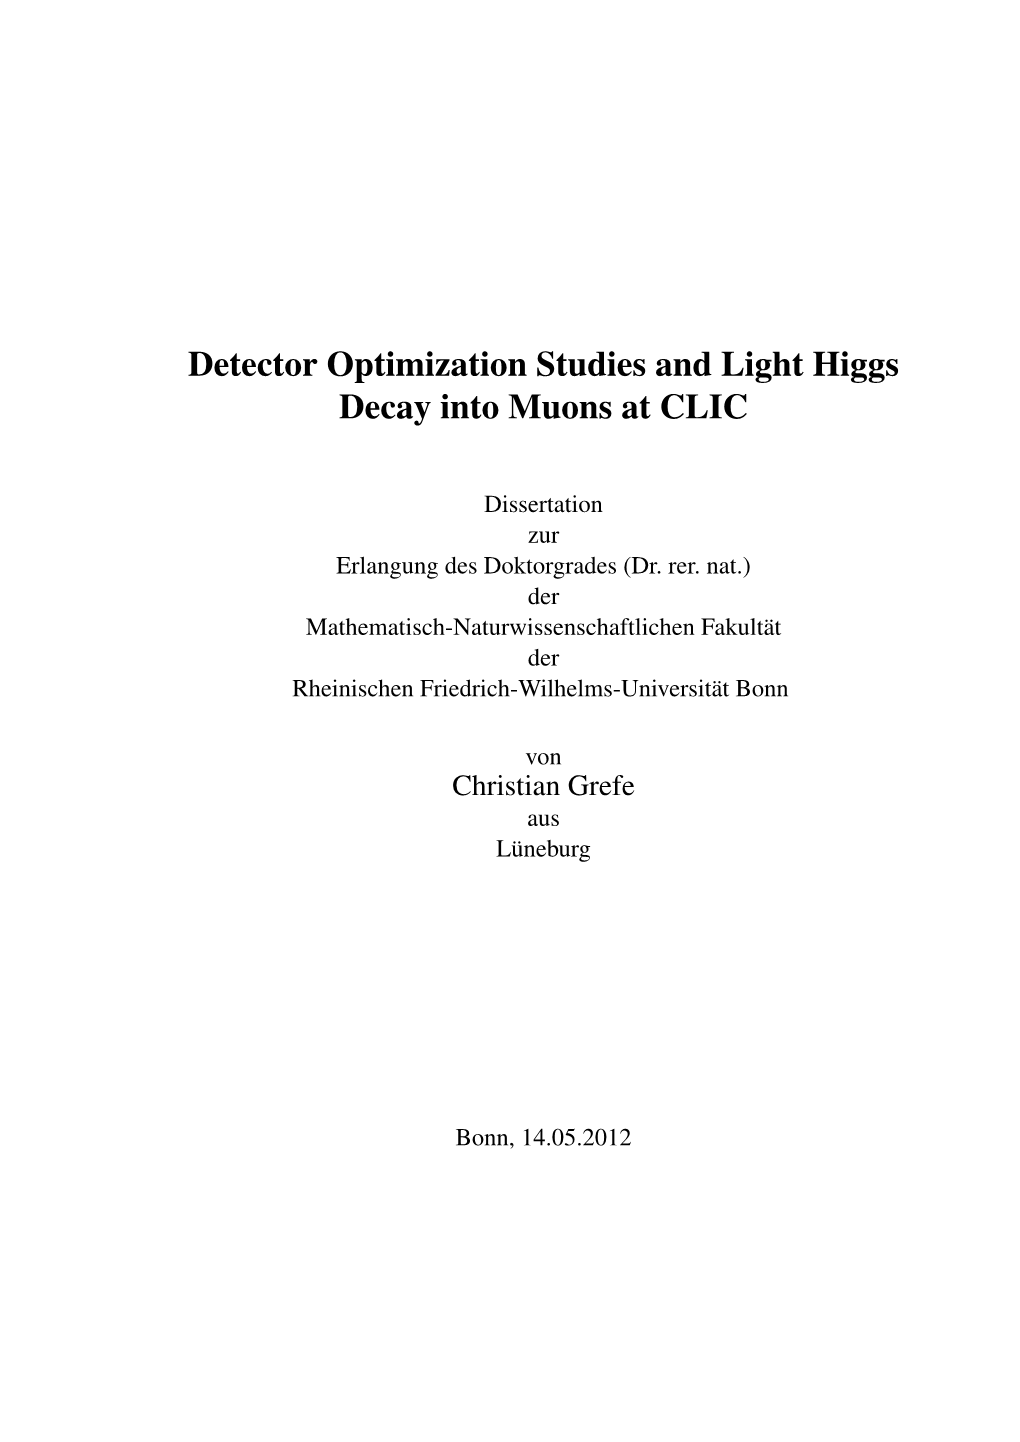 Detector Optimization Studies and Light Higgs Decay Into Muons at CLIC